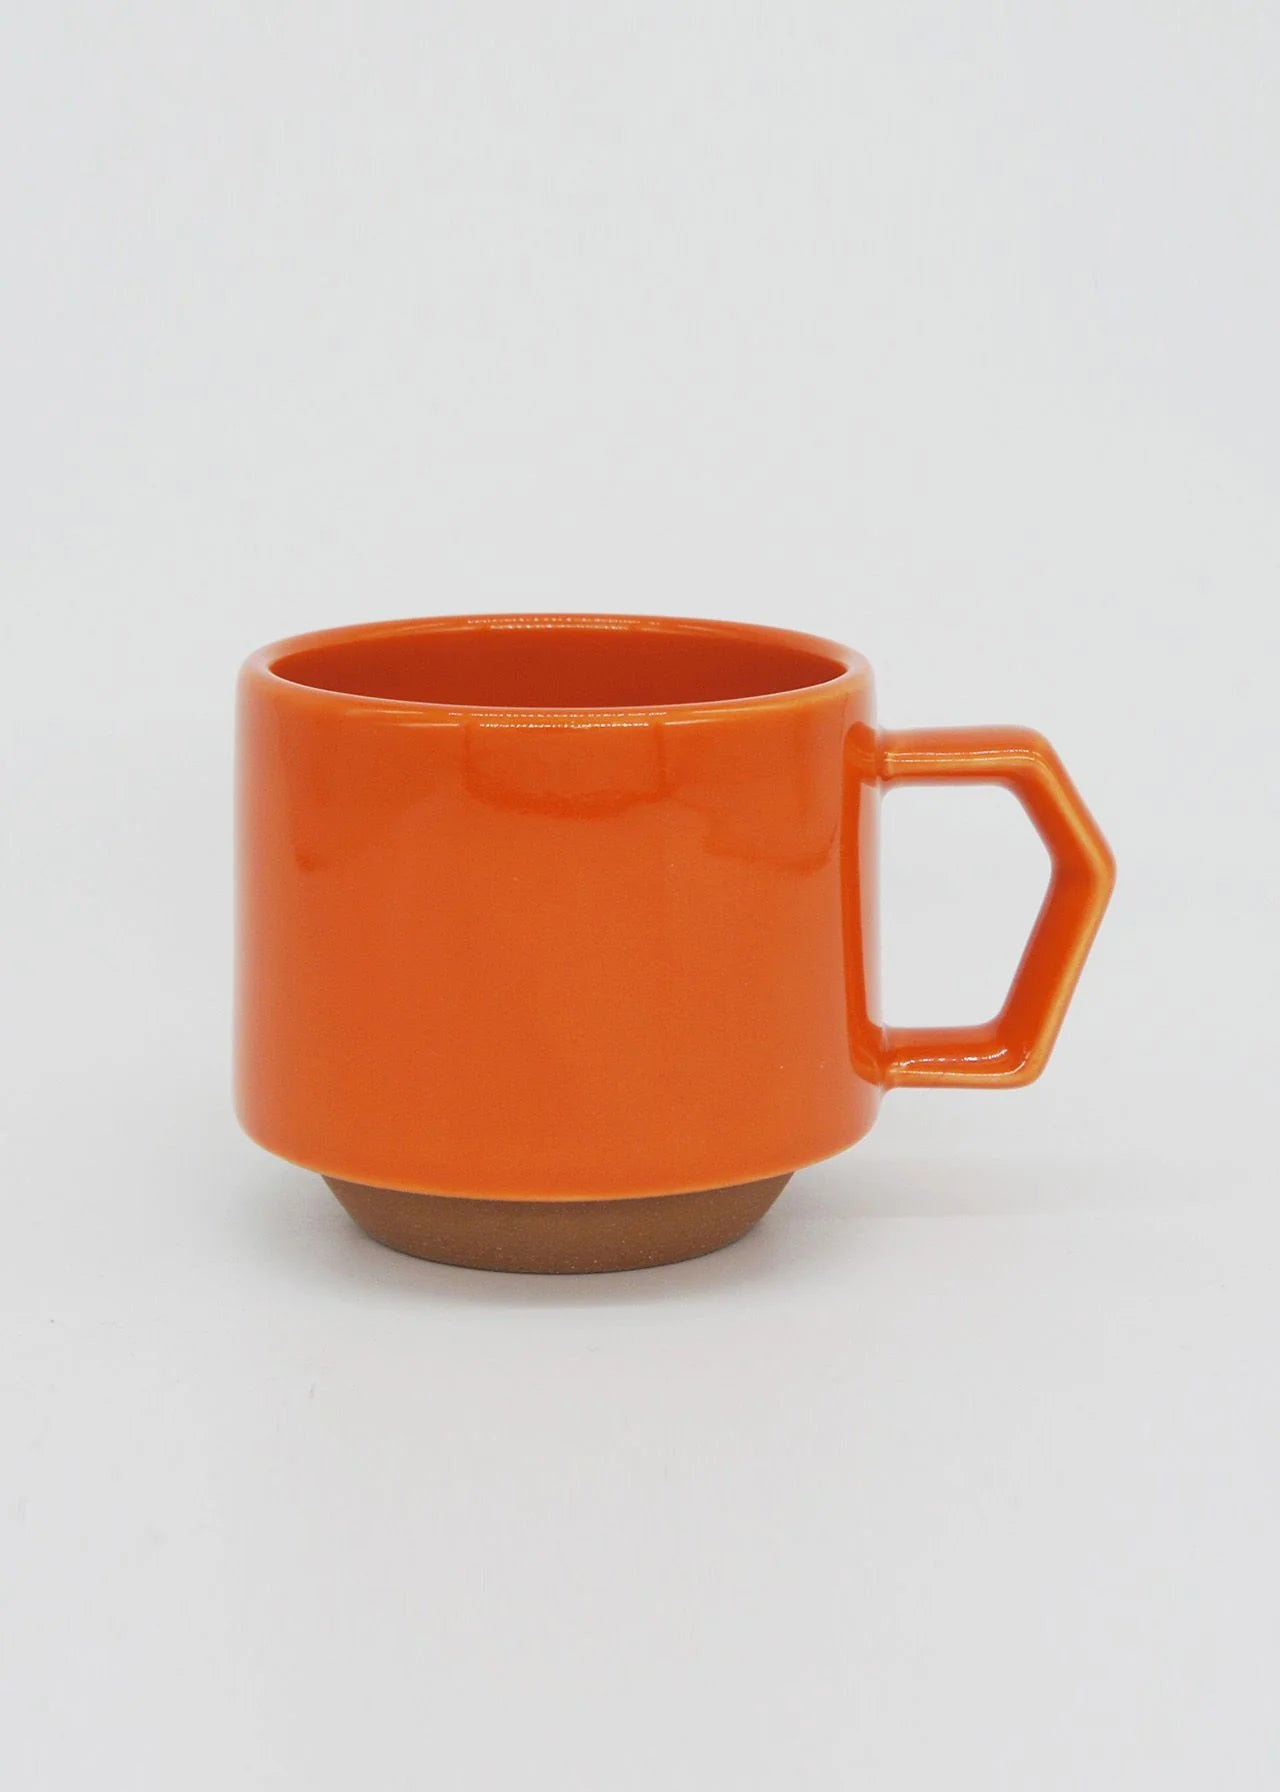 A CHIPS Inc. stackable orange mug with a handle on a white background.